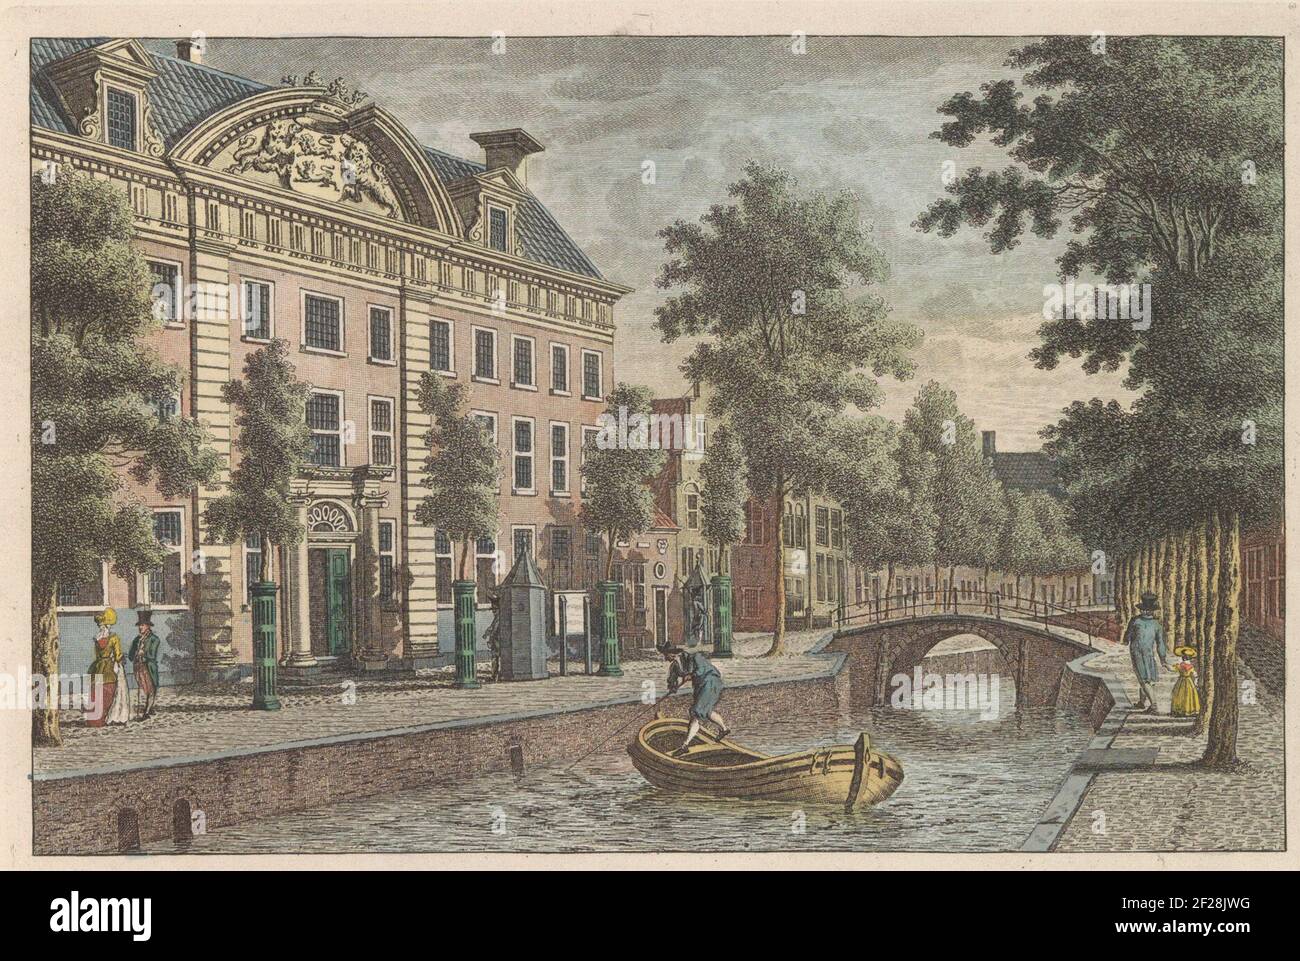 Provinciehuis te Leeuwarden, ca. 1790; T'Kollegie der Gedeputeerde Staaten, te Leeuwarden / Le Gouvernement - actuellement colêge des Etats députés à Leeuwarden.View of the College of Provincial Executive (Province House) at the two-way market in Leeuwarden, approx. 1790. Part of a sheet metal work from approx. 1824-1825 with 74 (unnumbered) plates of the most important topographic faces and several morals and habits in the United Kingdom der Nederlanden. Stock Photo